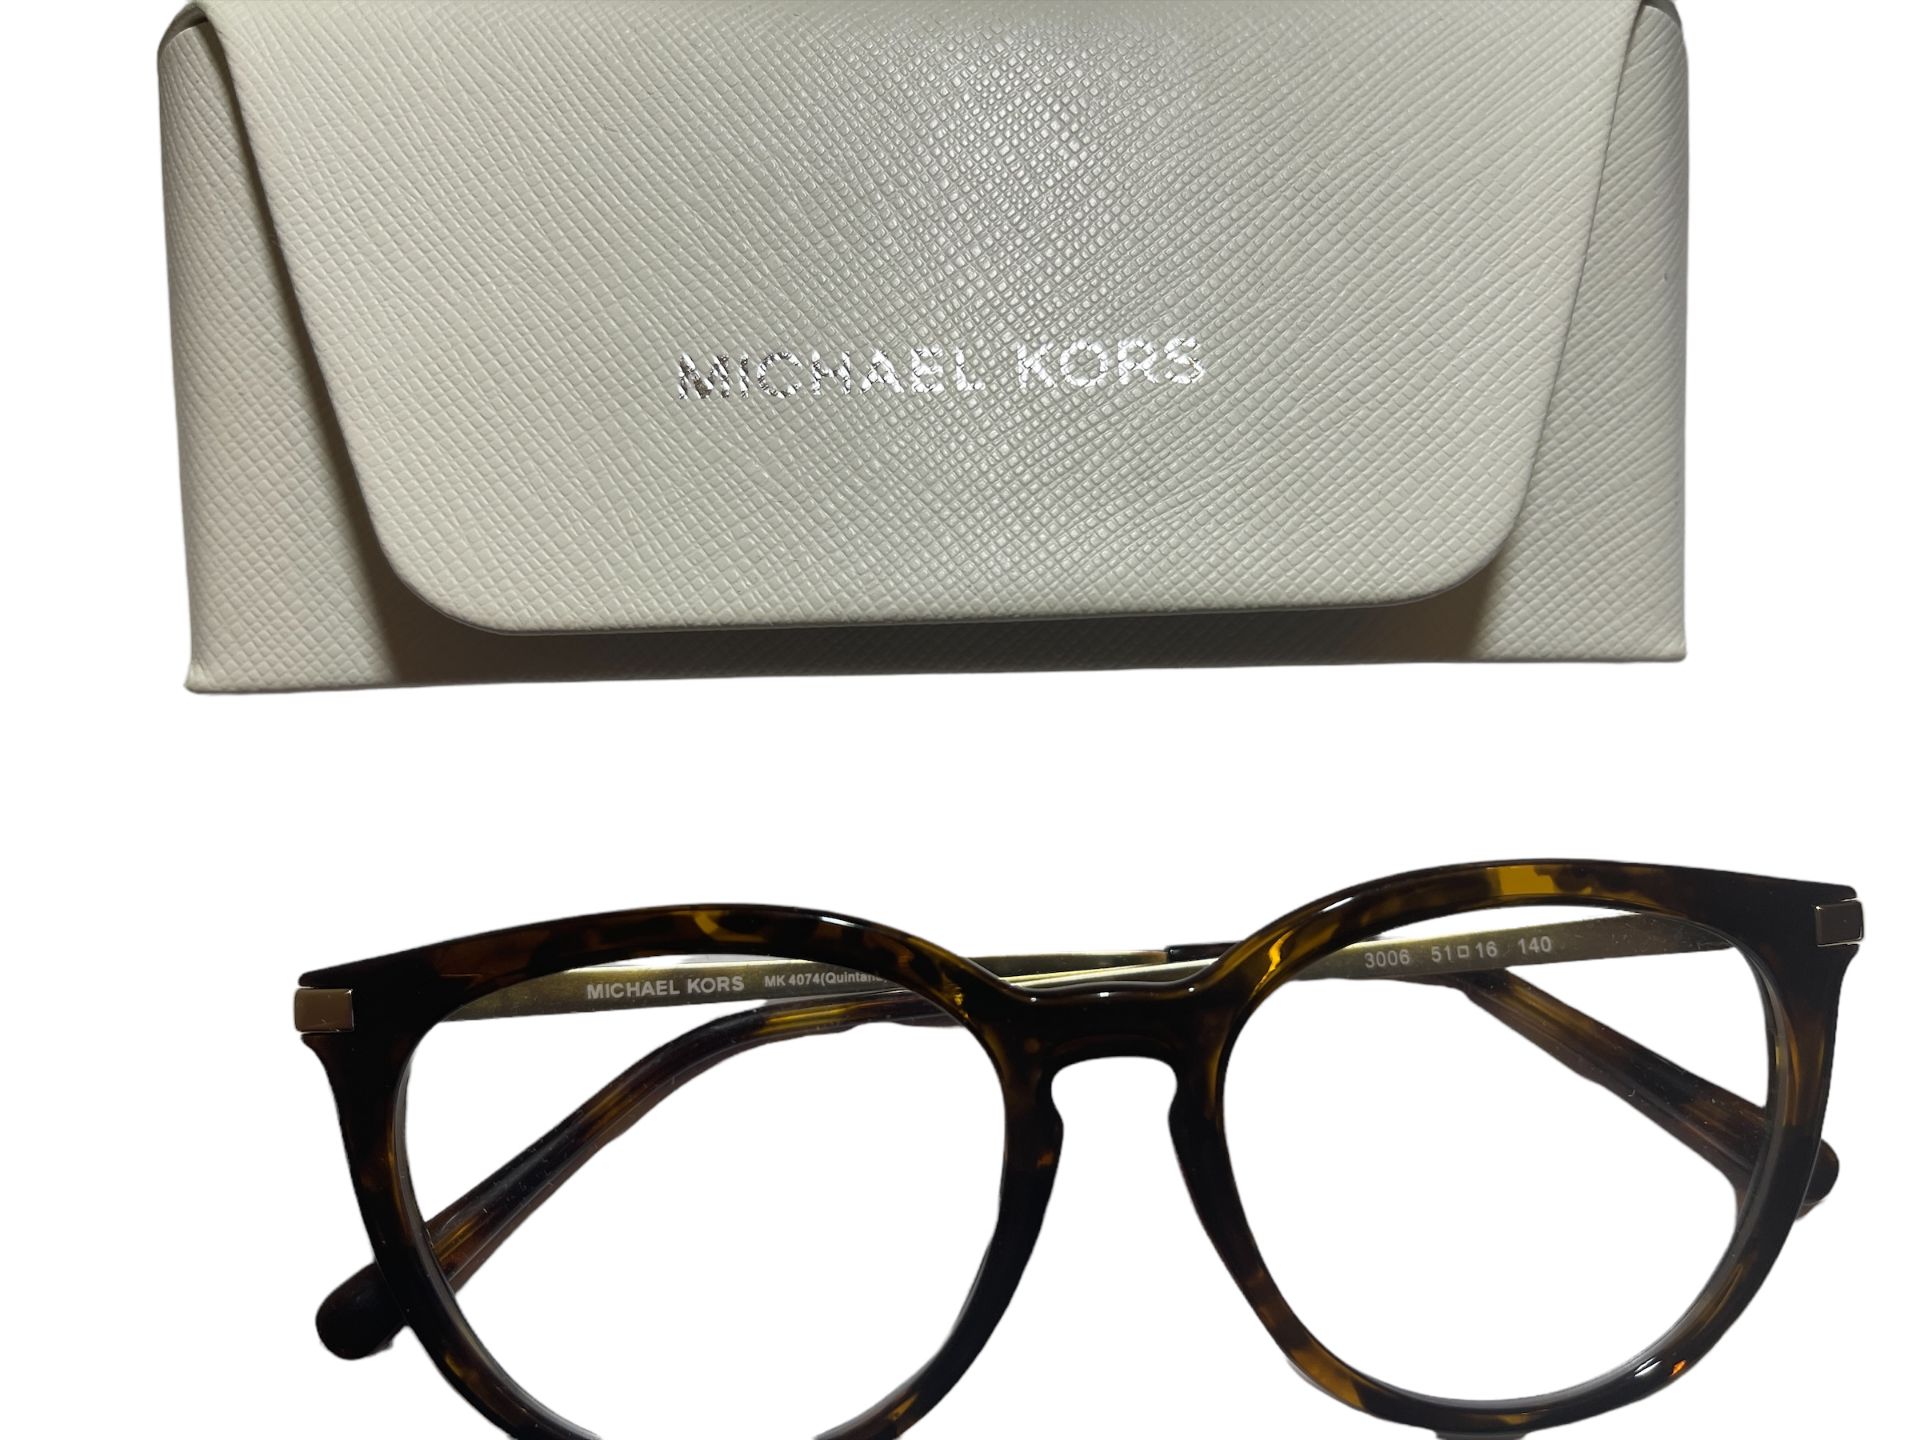 Michael Kors Spectacle Frames & Case (MK4074 QUINTANA 3006) RRP £299 Surplus stock from Private J... - Image 5 of 9